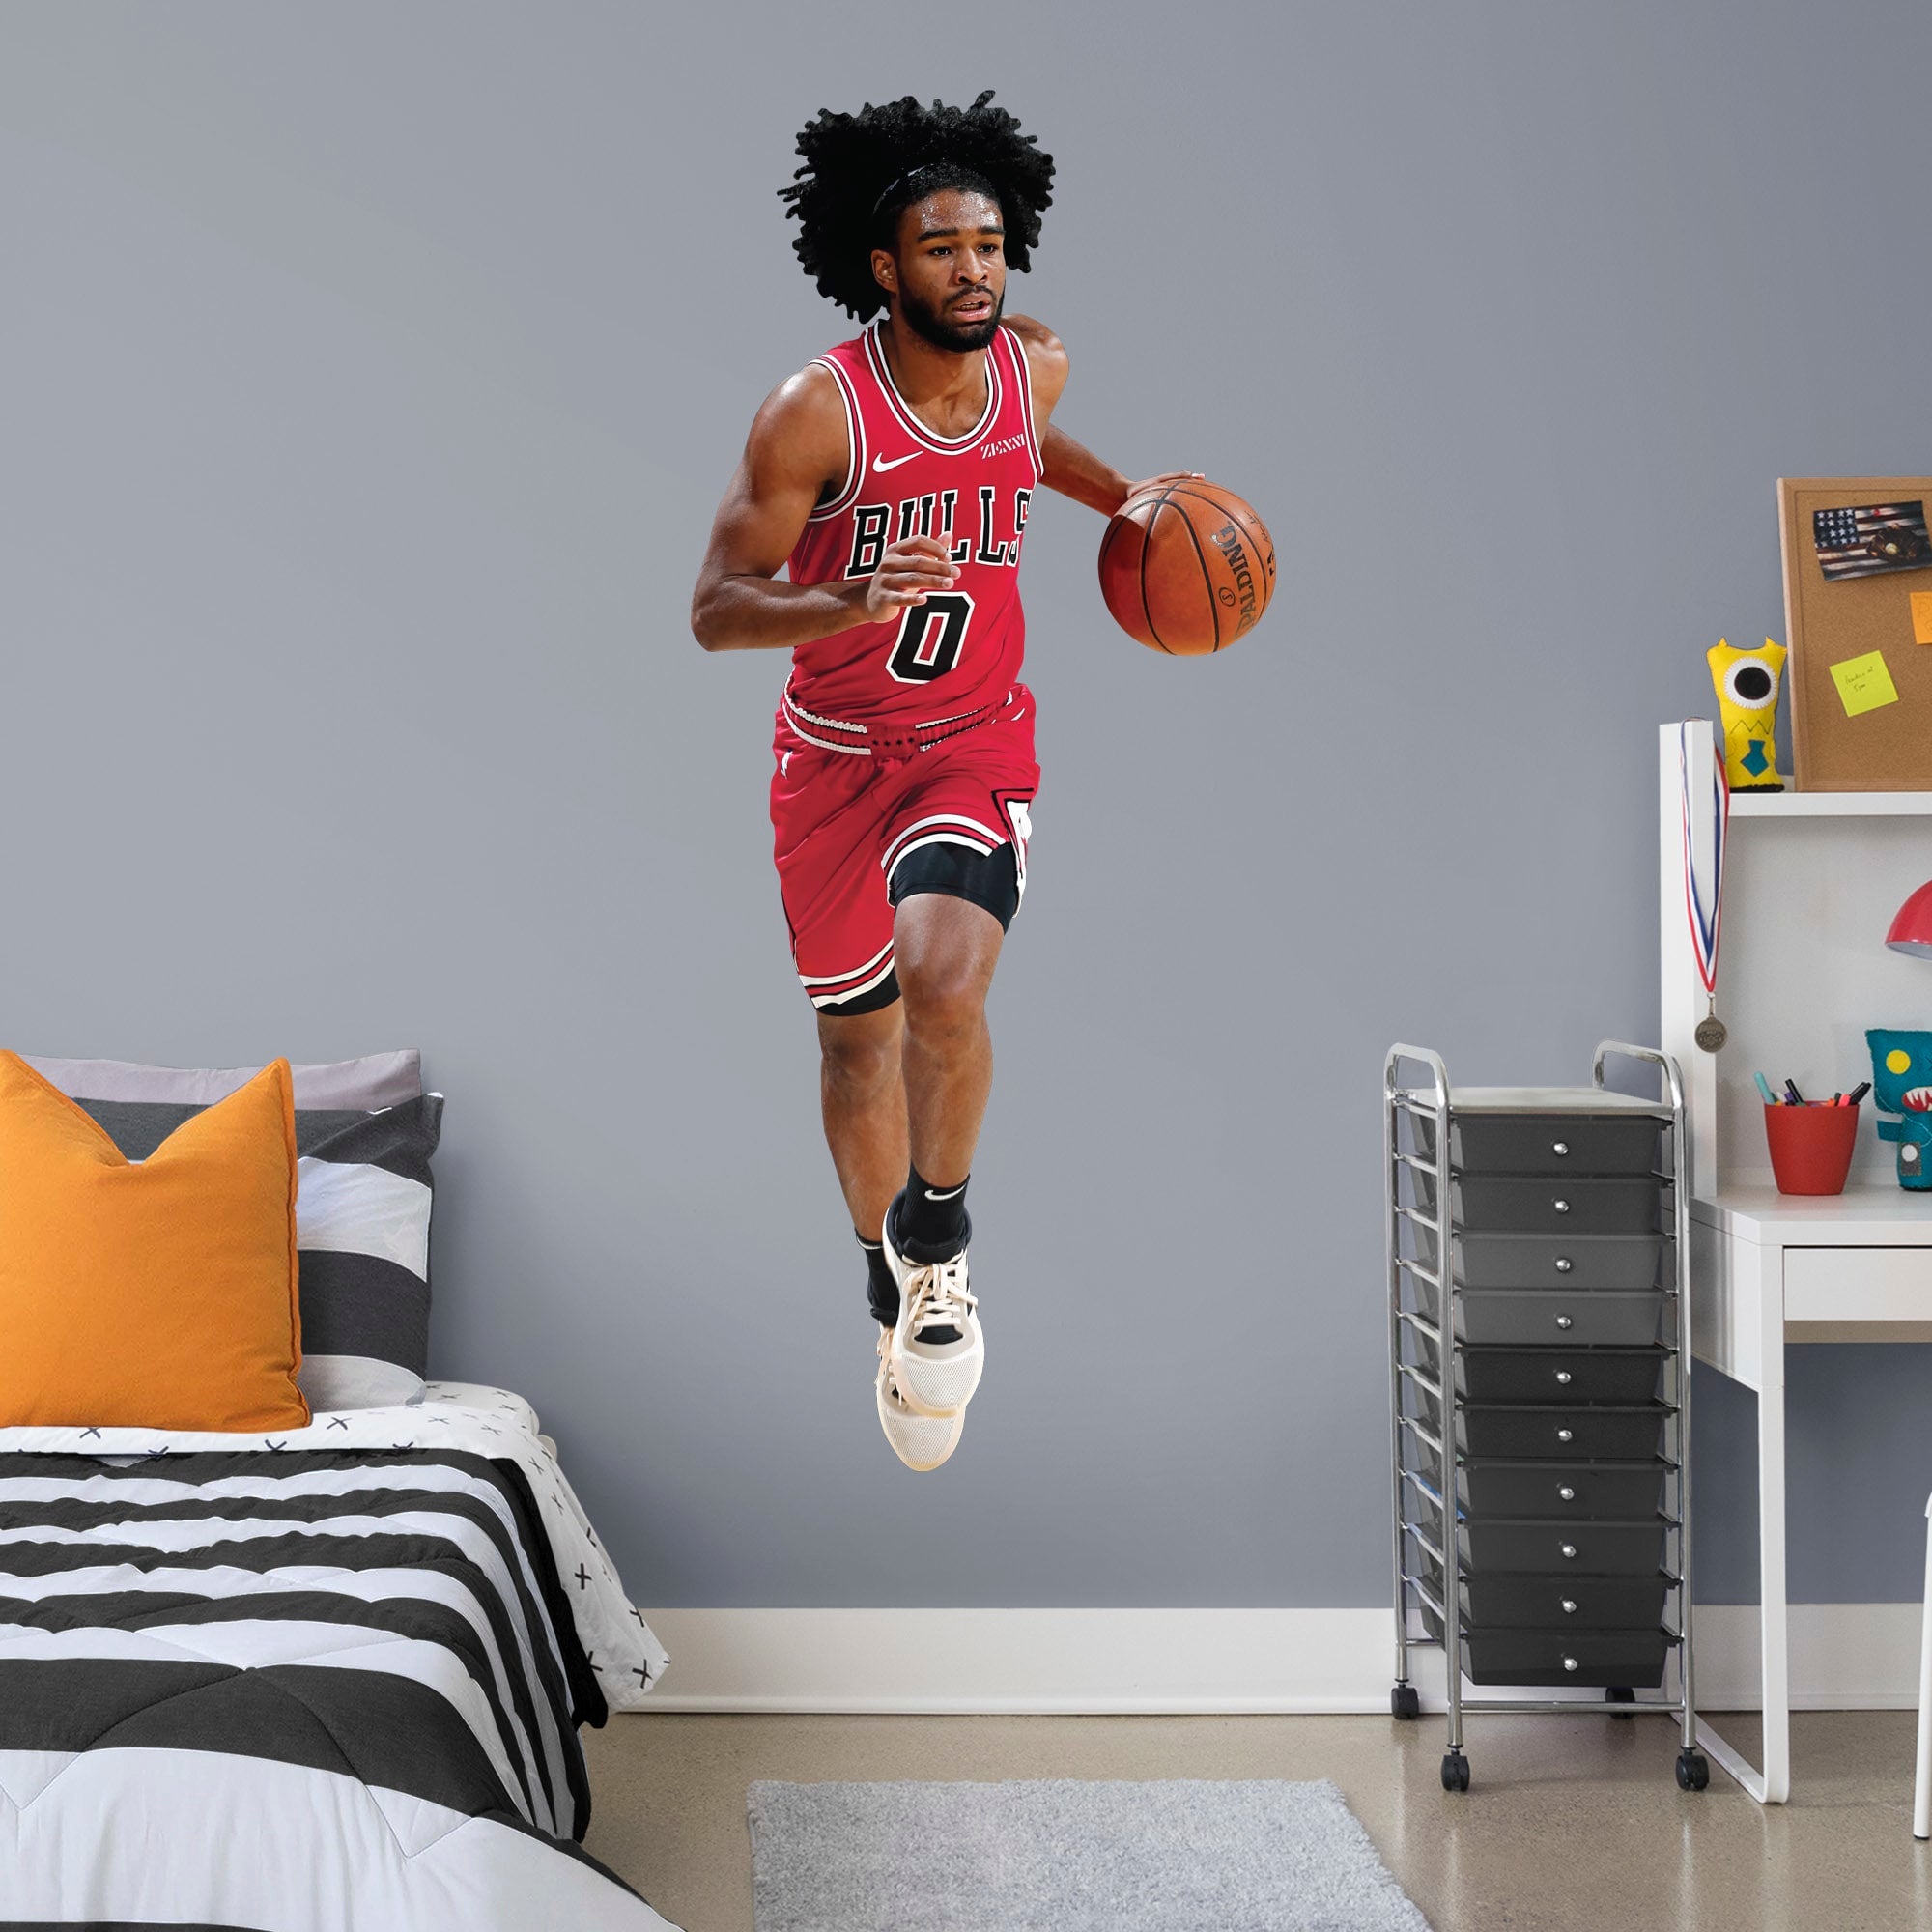 Coby White for Chicago Bulls - Officially Licensed NBA Removable Wall Decal Life-Size Athlete + 2 Decals (33"W x 78"H) by Fathea